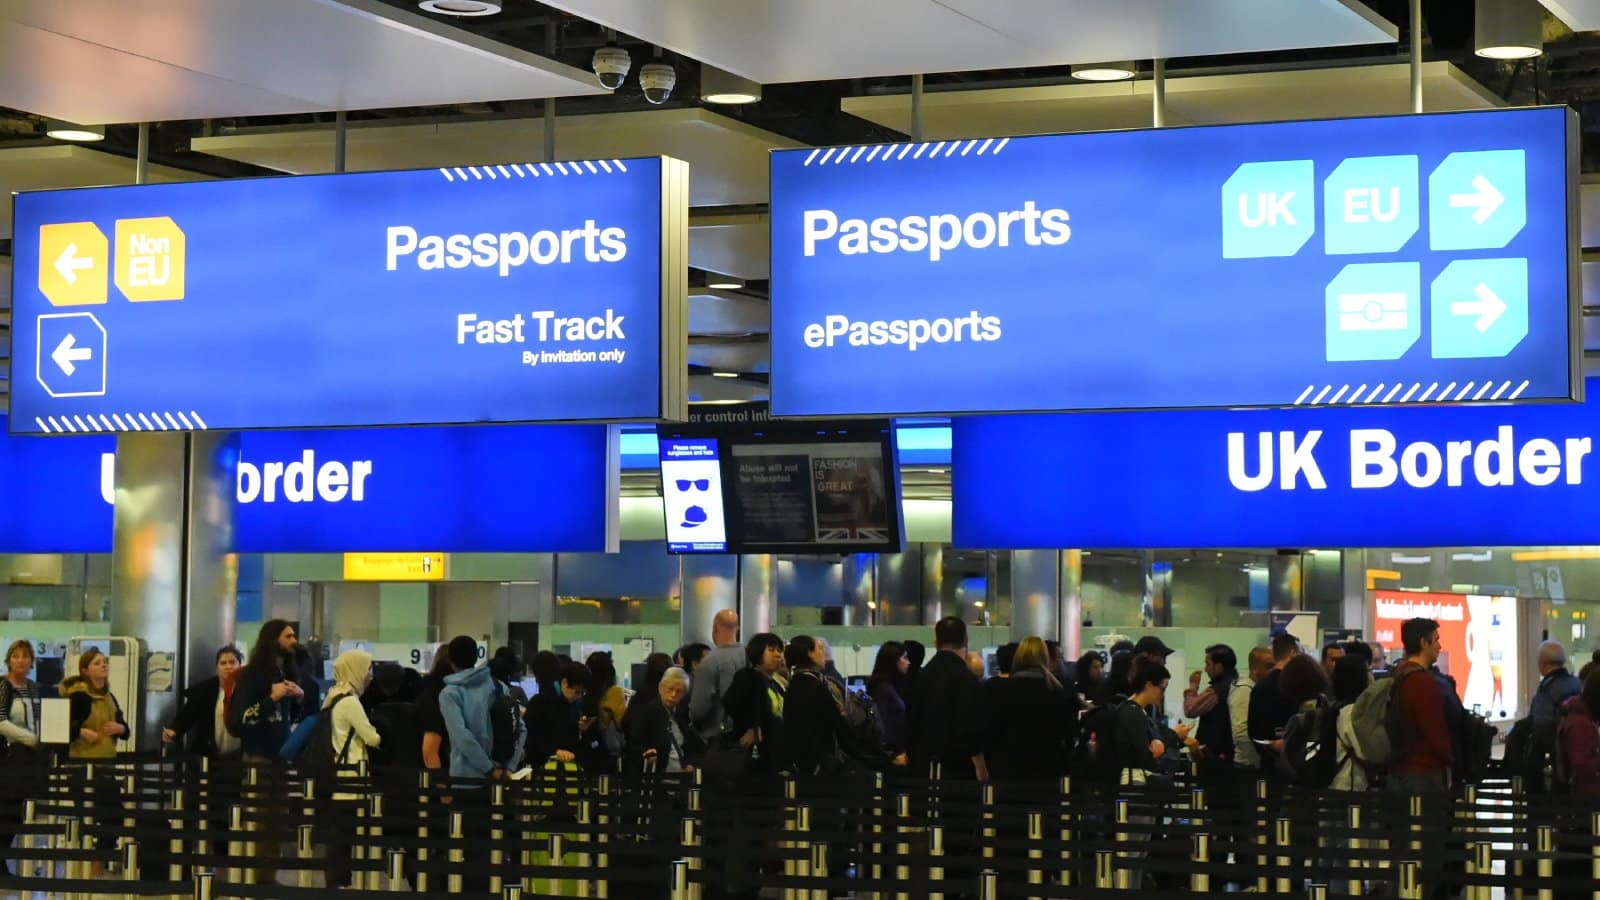 Image Credit: Shutterstock / 1000 Words <p>Post-Brexit passport rules are barring millions of Britons from entering the EU which is set to cause upheaval and chaos.</p>